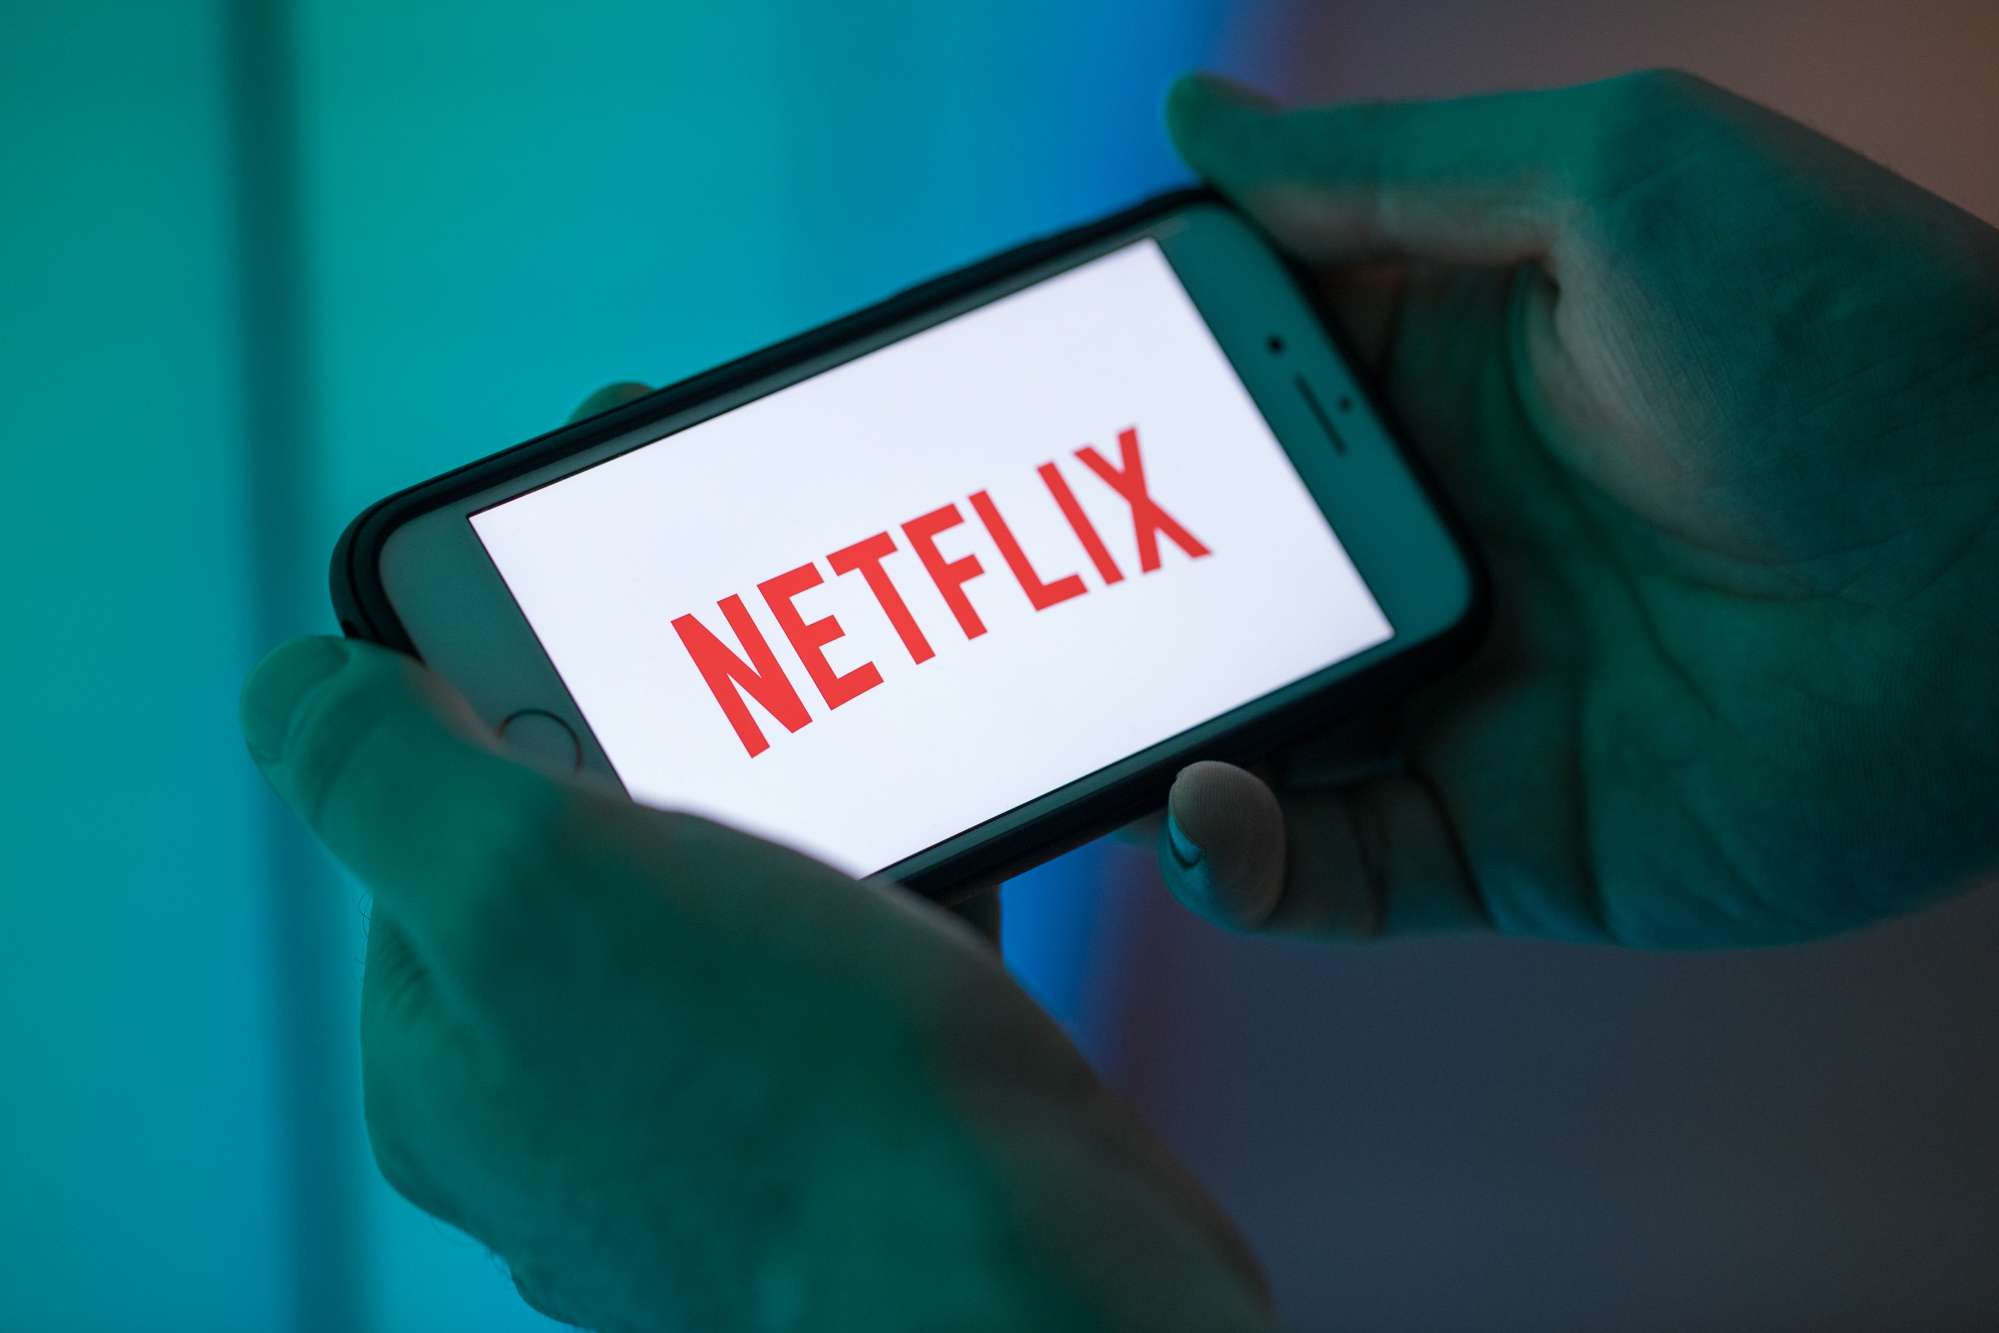 A second year into the streaming wars, and still no one is close to beating Netflix